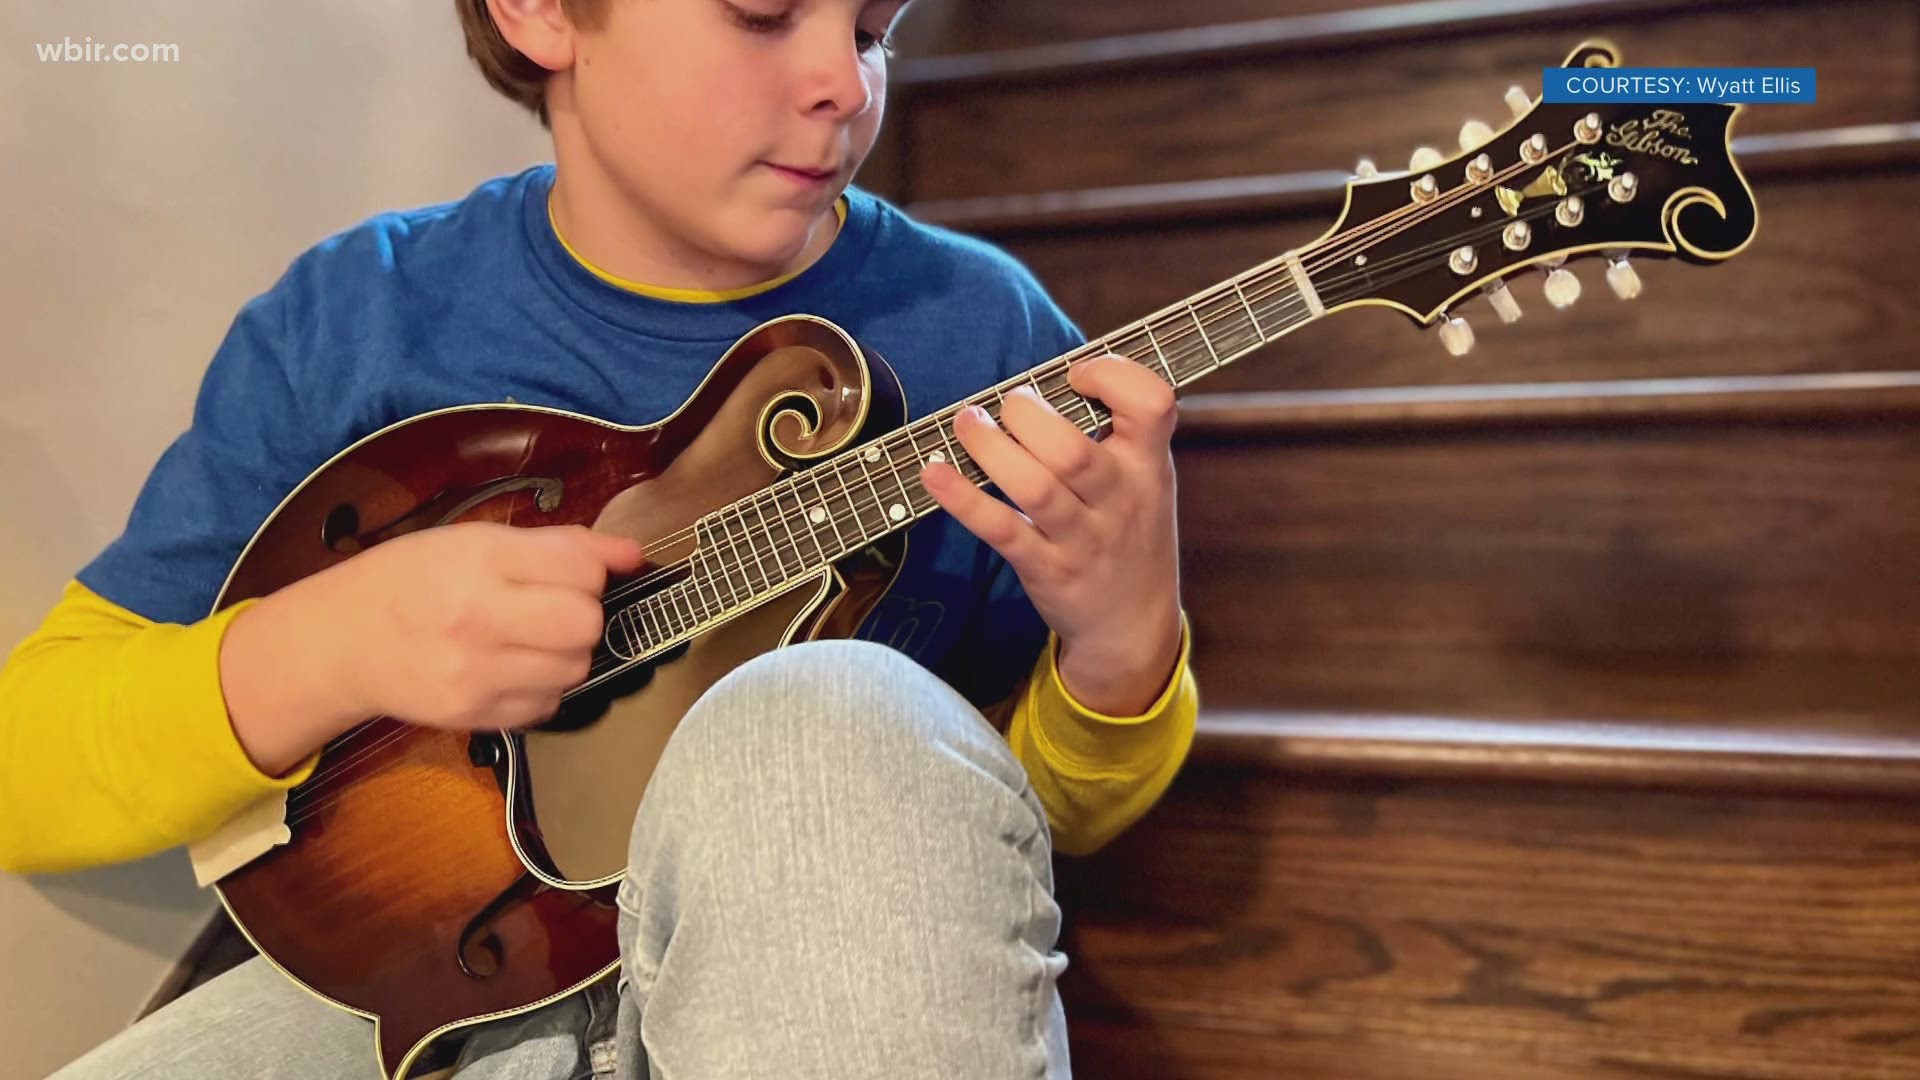 While the pandemic has been tough on many music careers, it's helping one young mandolin player get his off the ground. Feb. 8,2021-4pm.